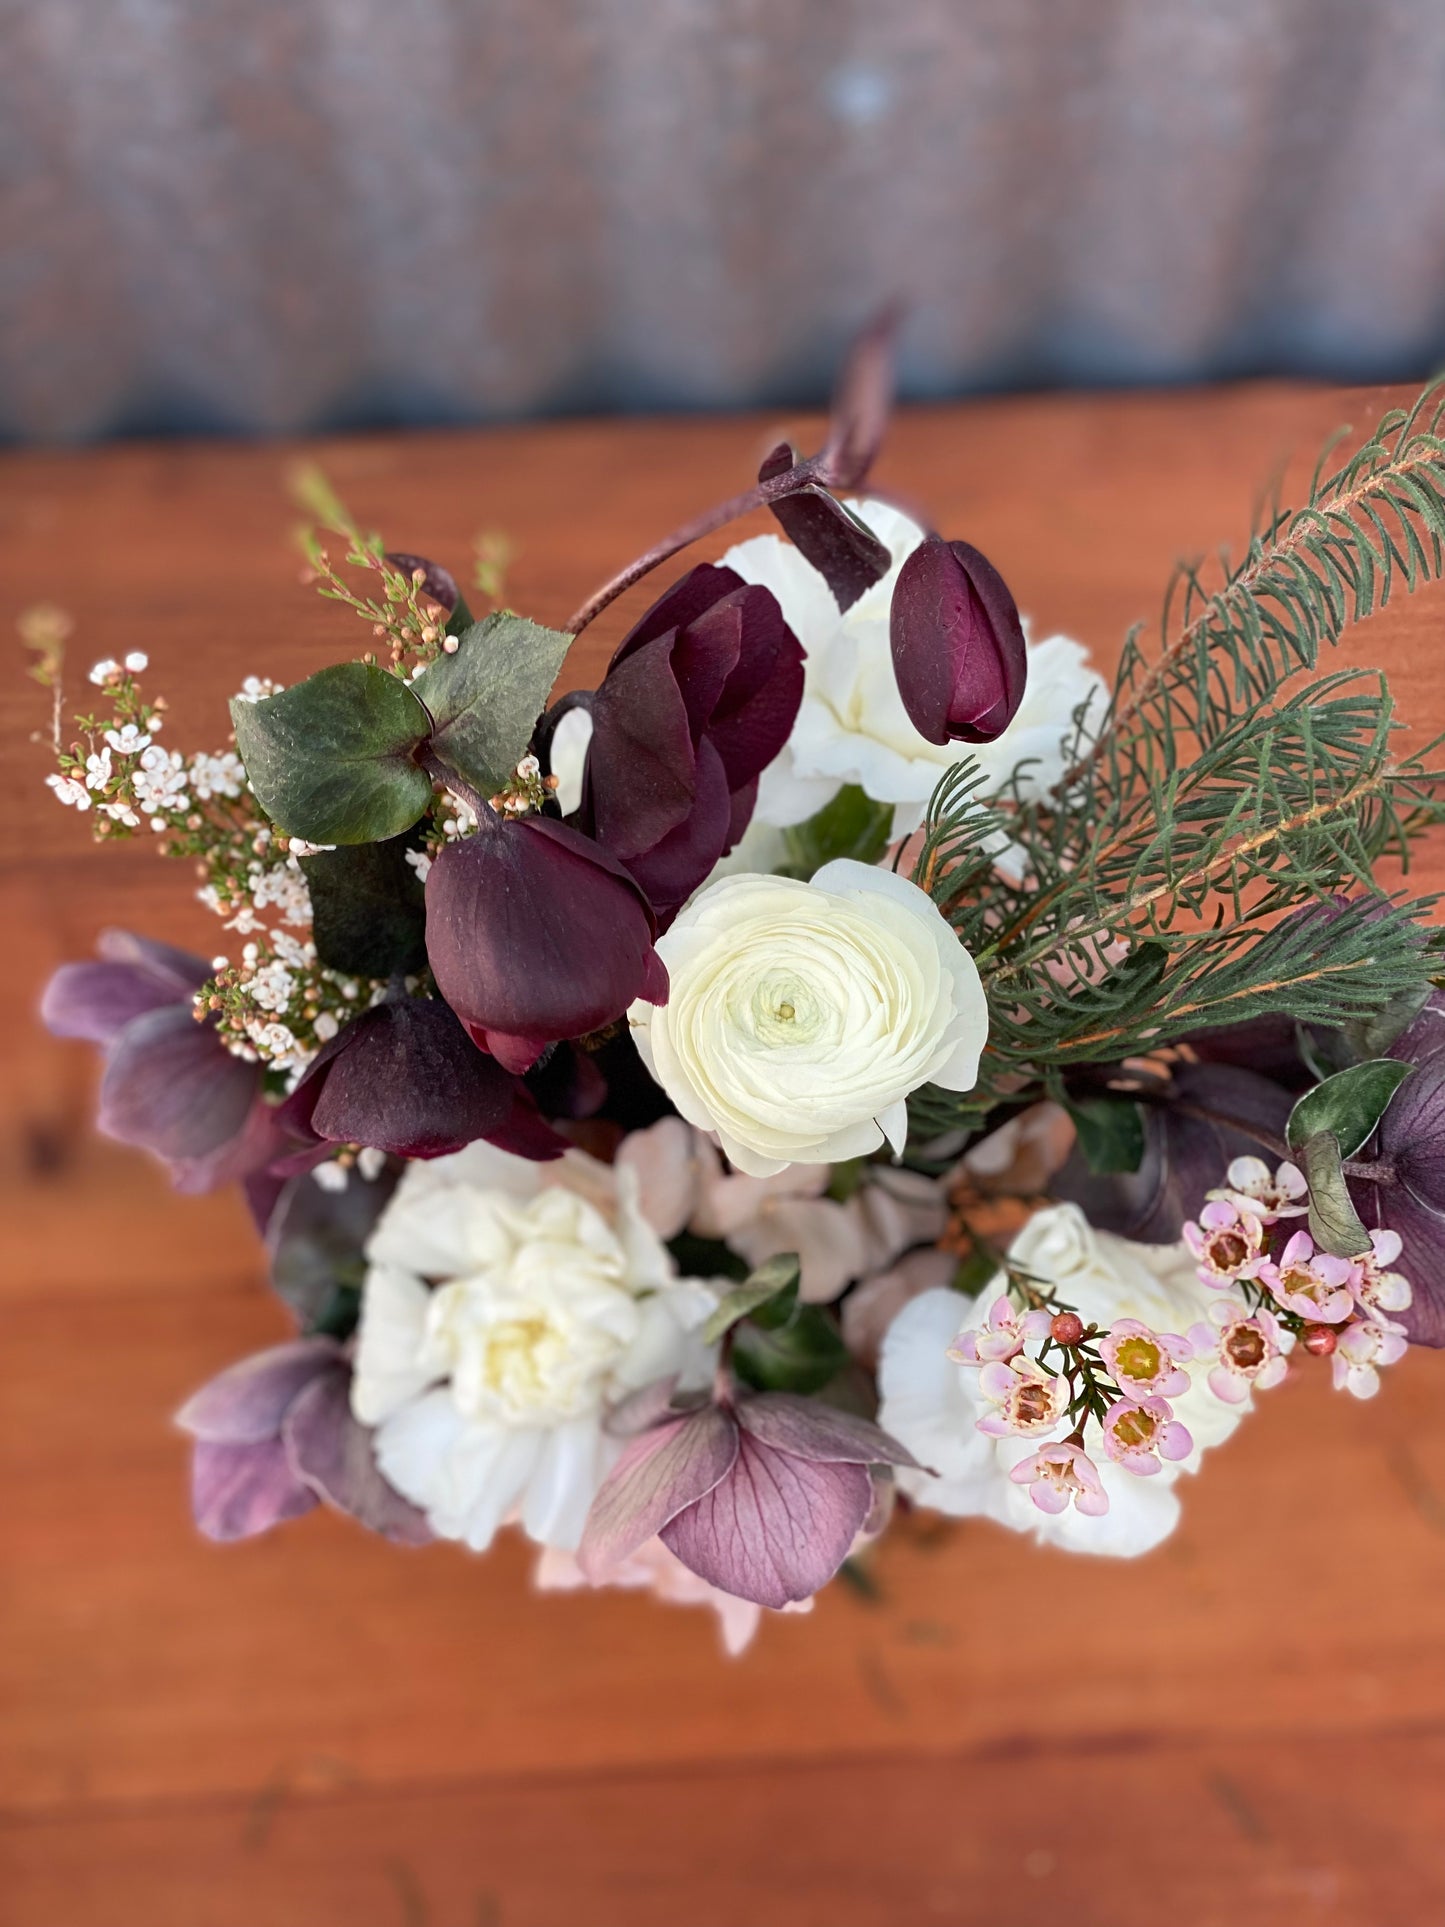 This week’s Best of Flor Bouquet